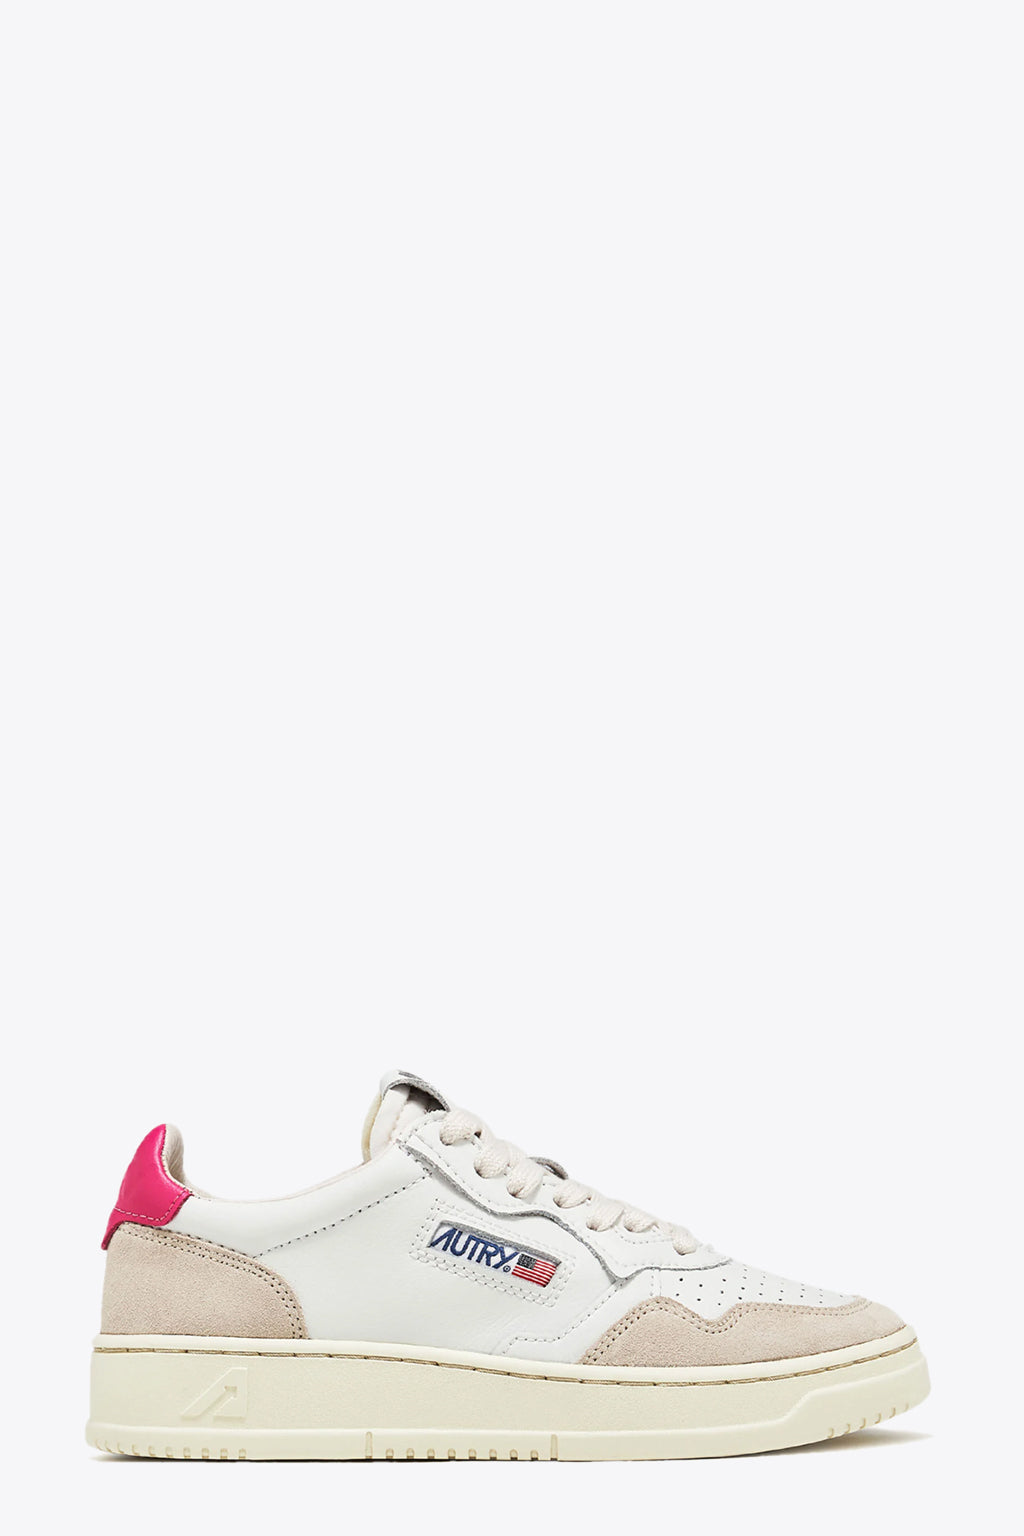 alt-image__White-leather-and-suede-low-sneaker-with-fucsia-tab---Medalist